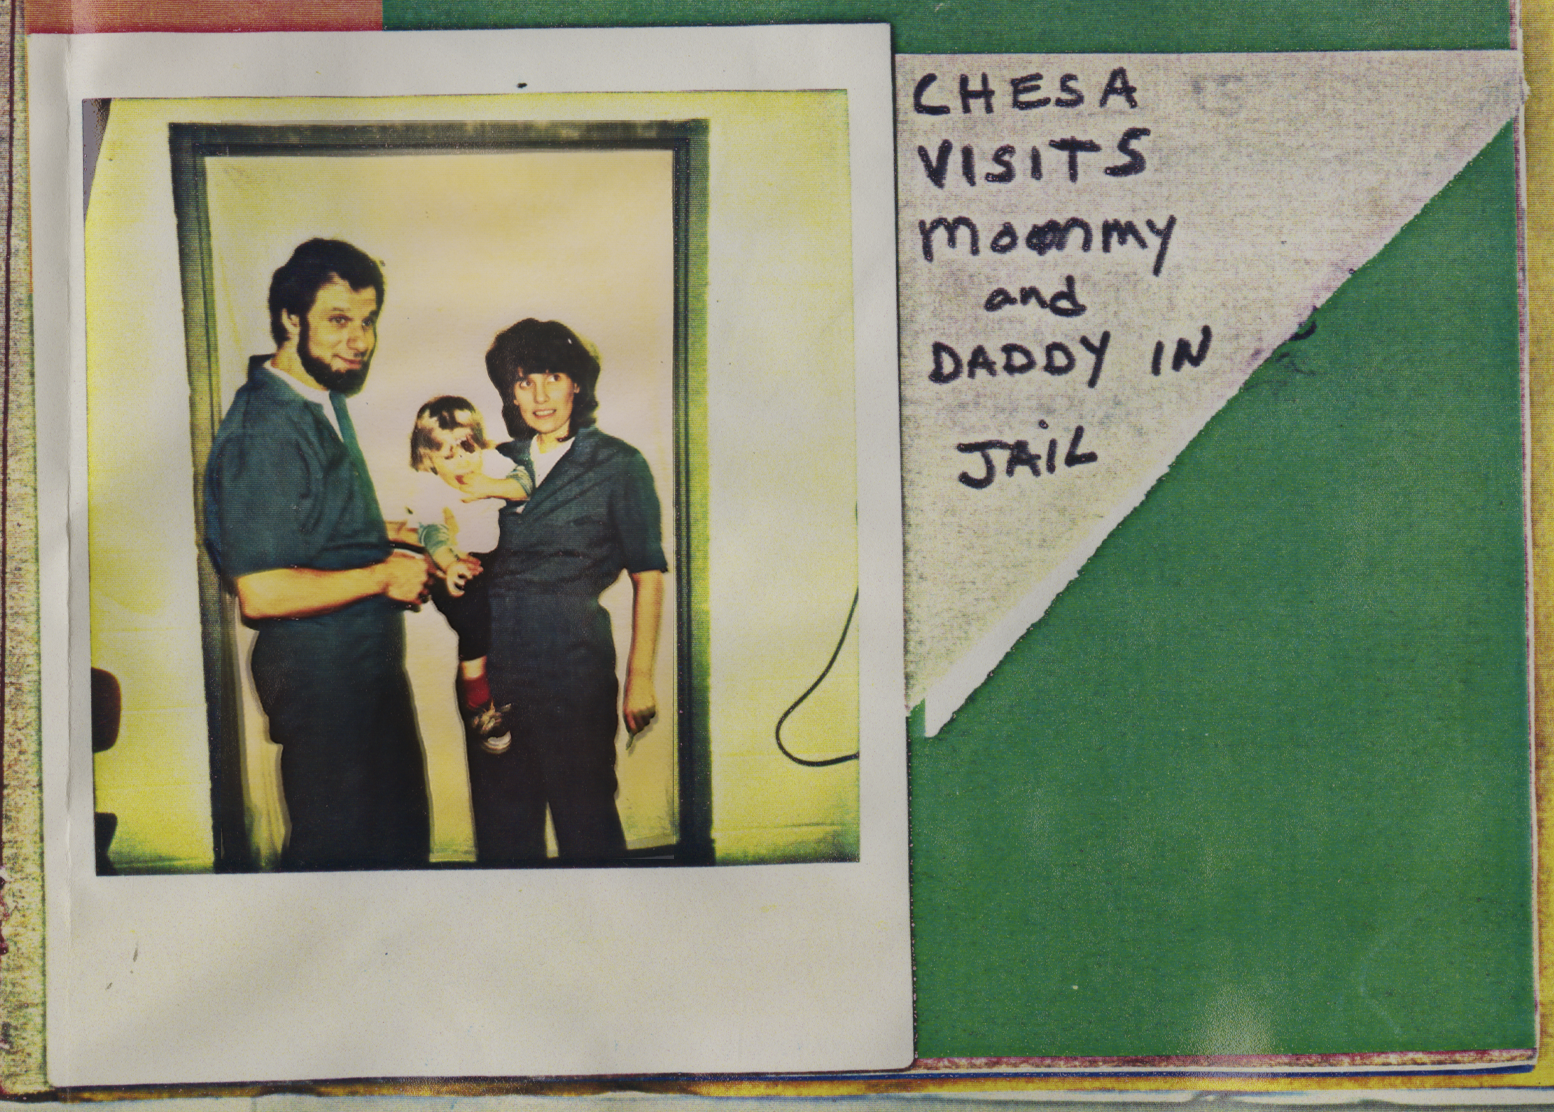 a polaroid of a small kid with two parents in prison uniforms labeled 'Chesa visits mommy and daddy in jail'